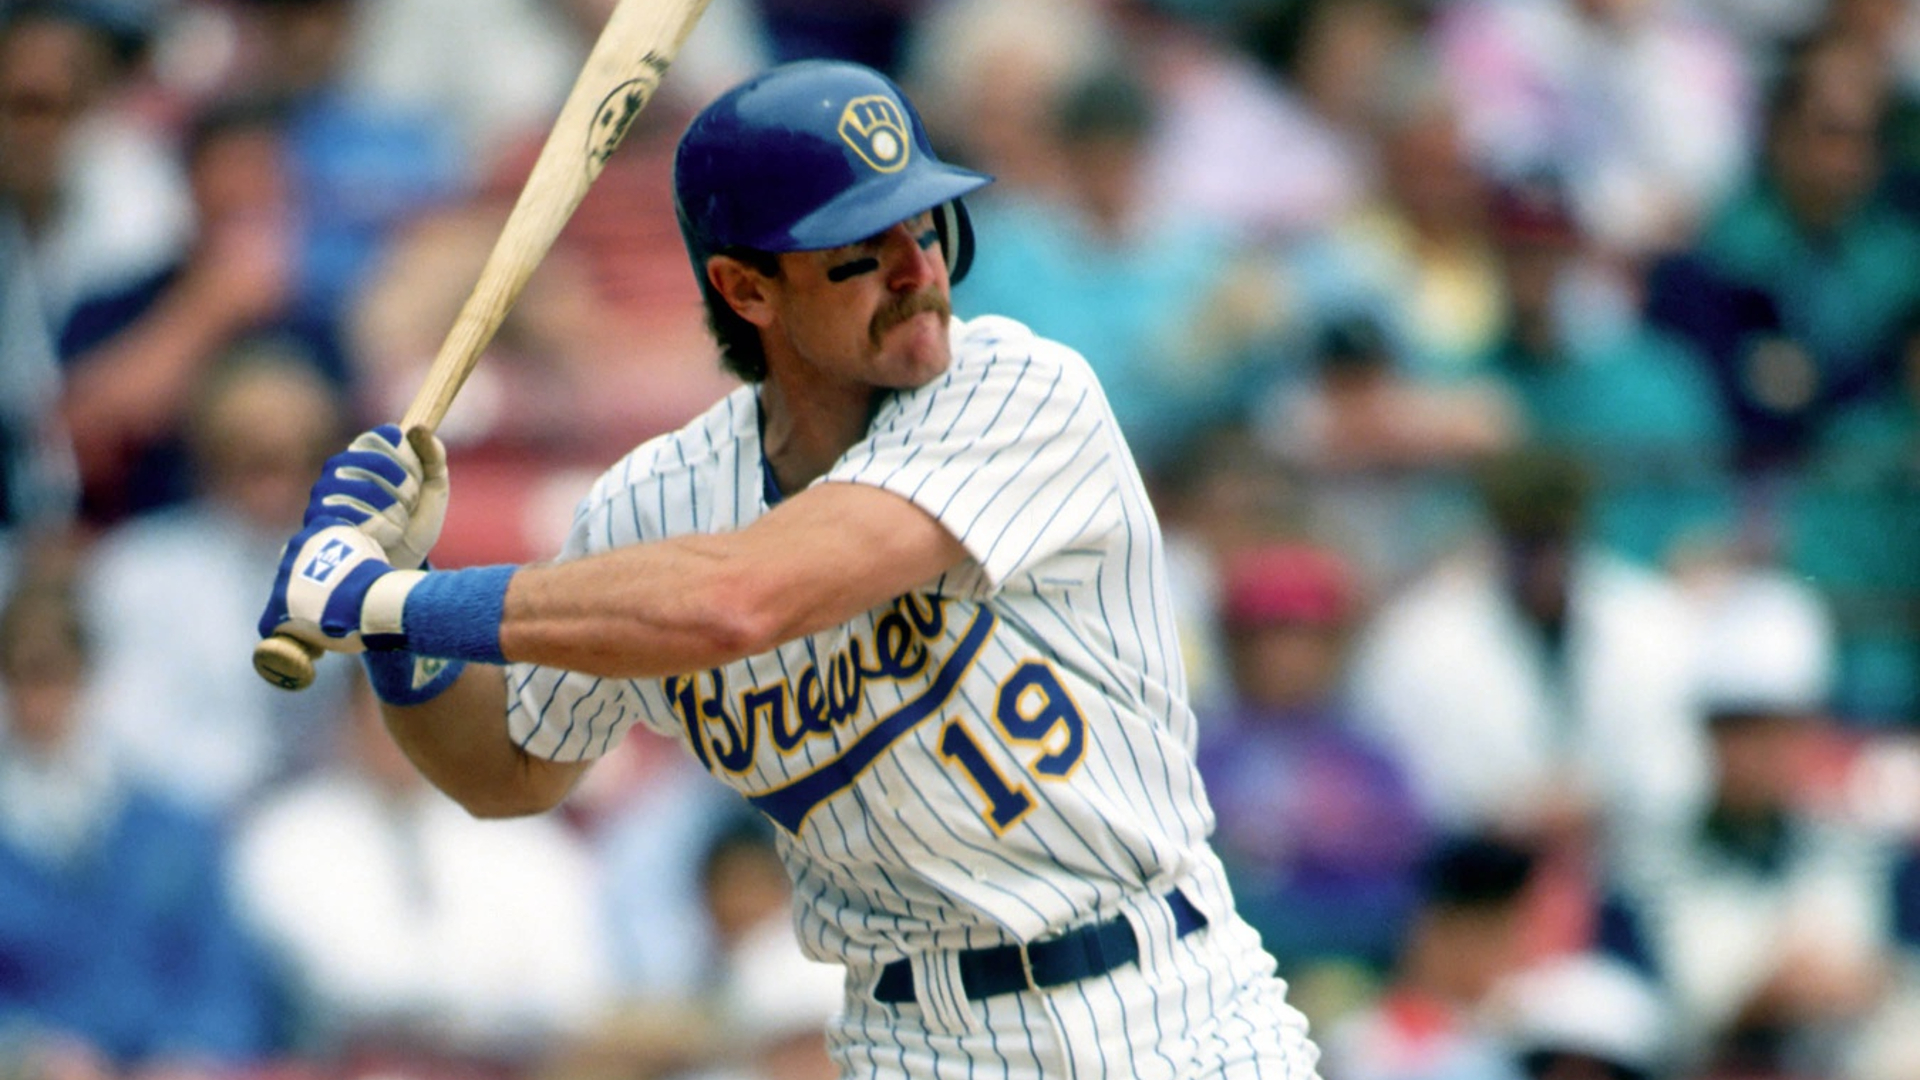 Catching up with Hall of Famer and Brewers legend Robin Yount - The Athletic